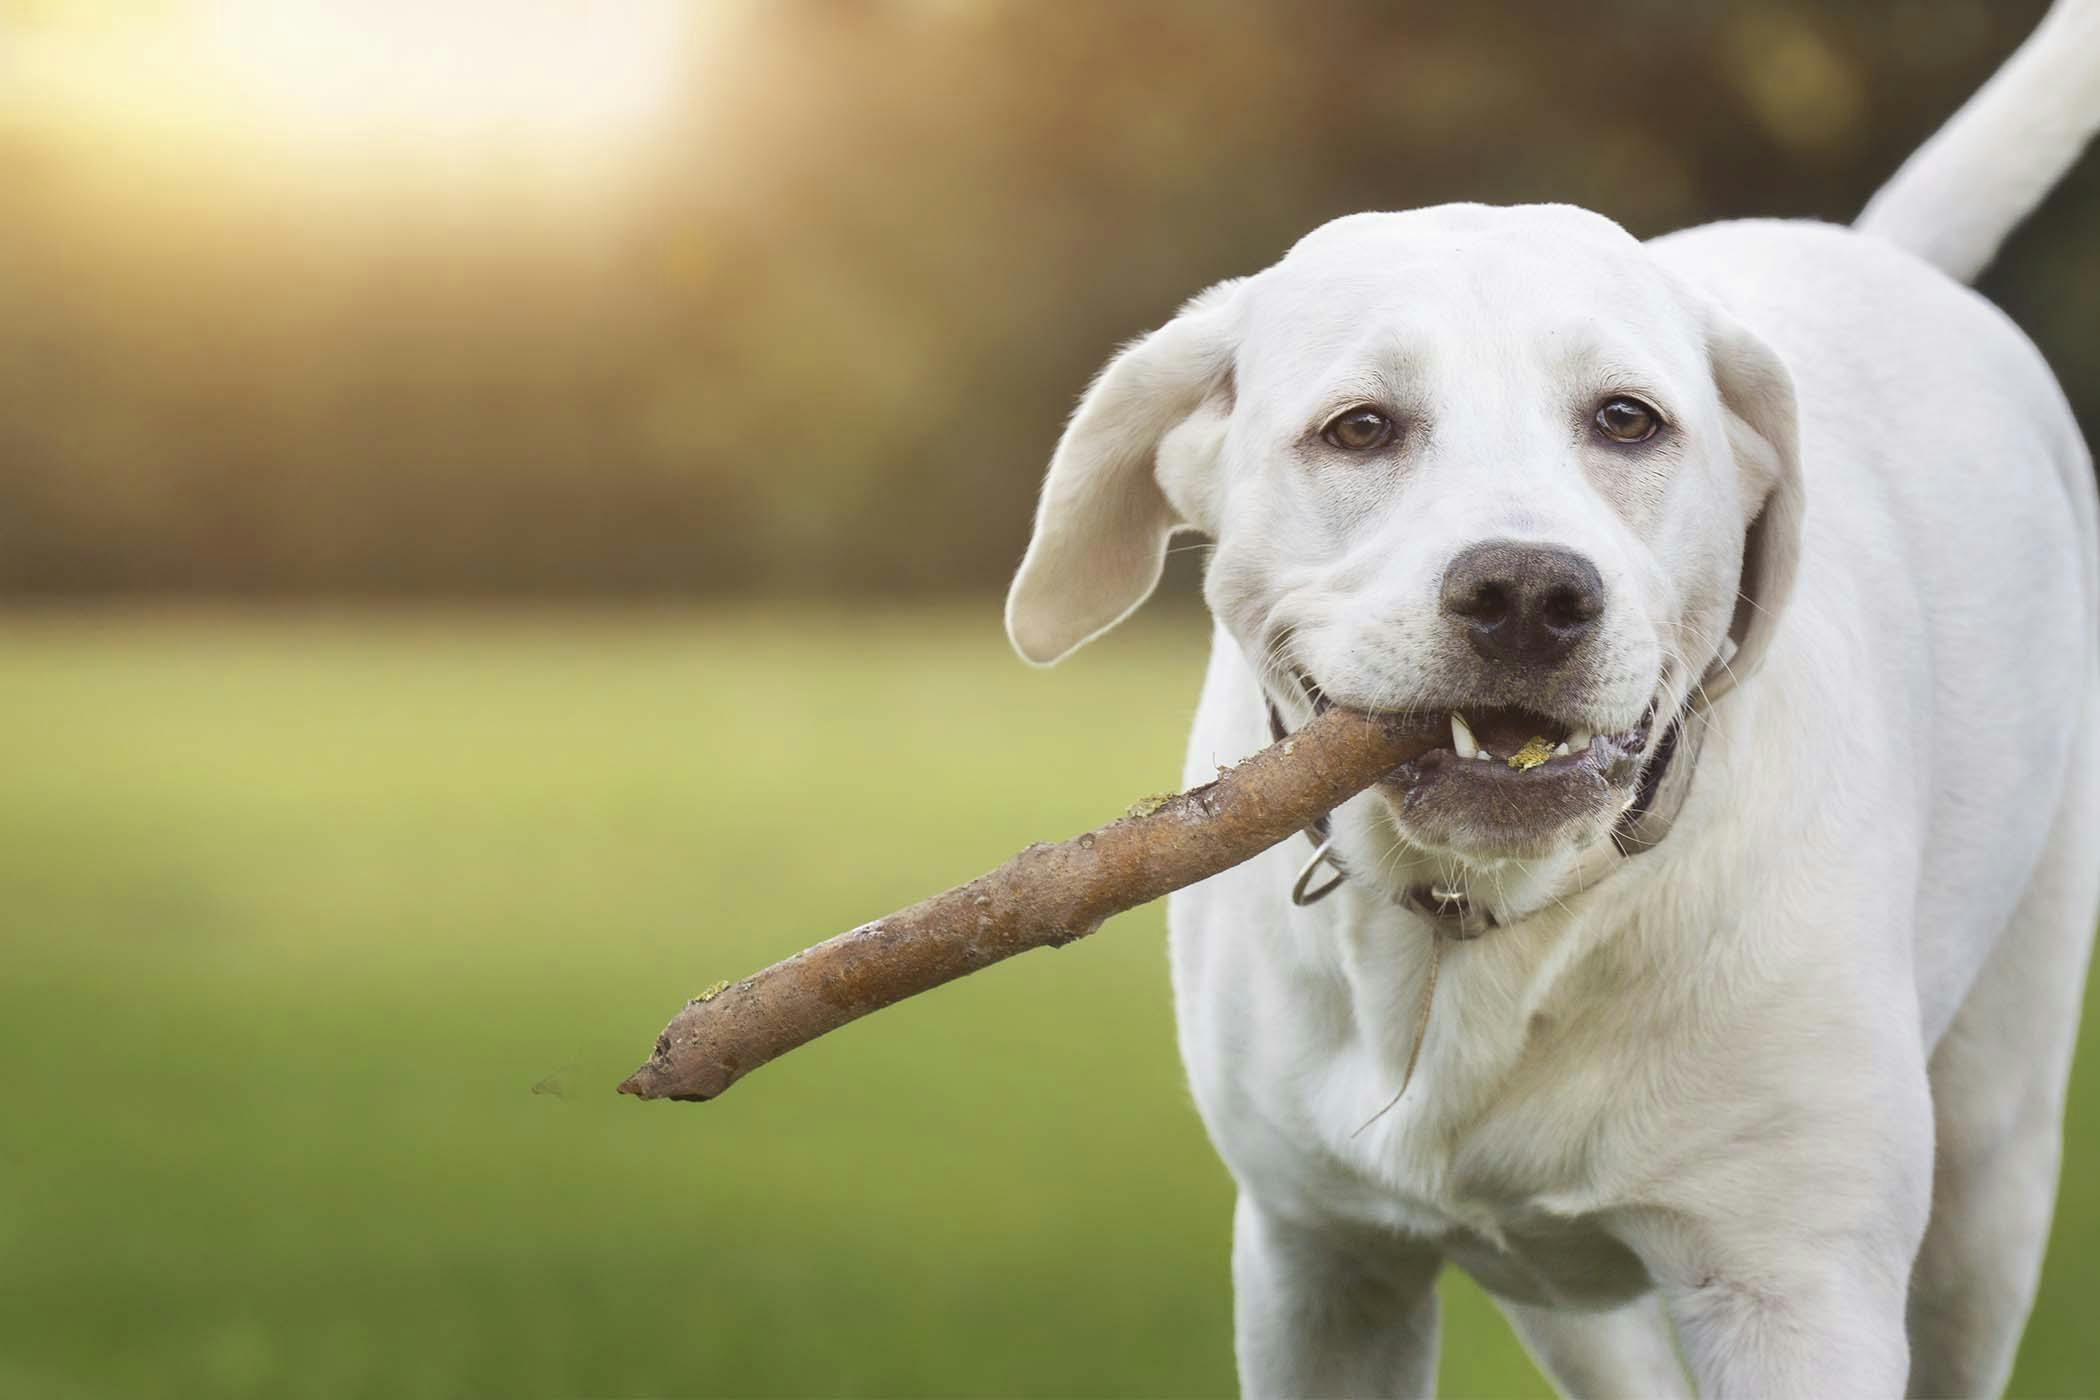 How to Train Your Dog to Not Eat Sticks | Wag!